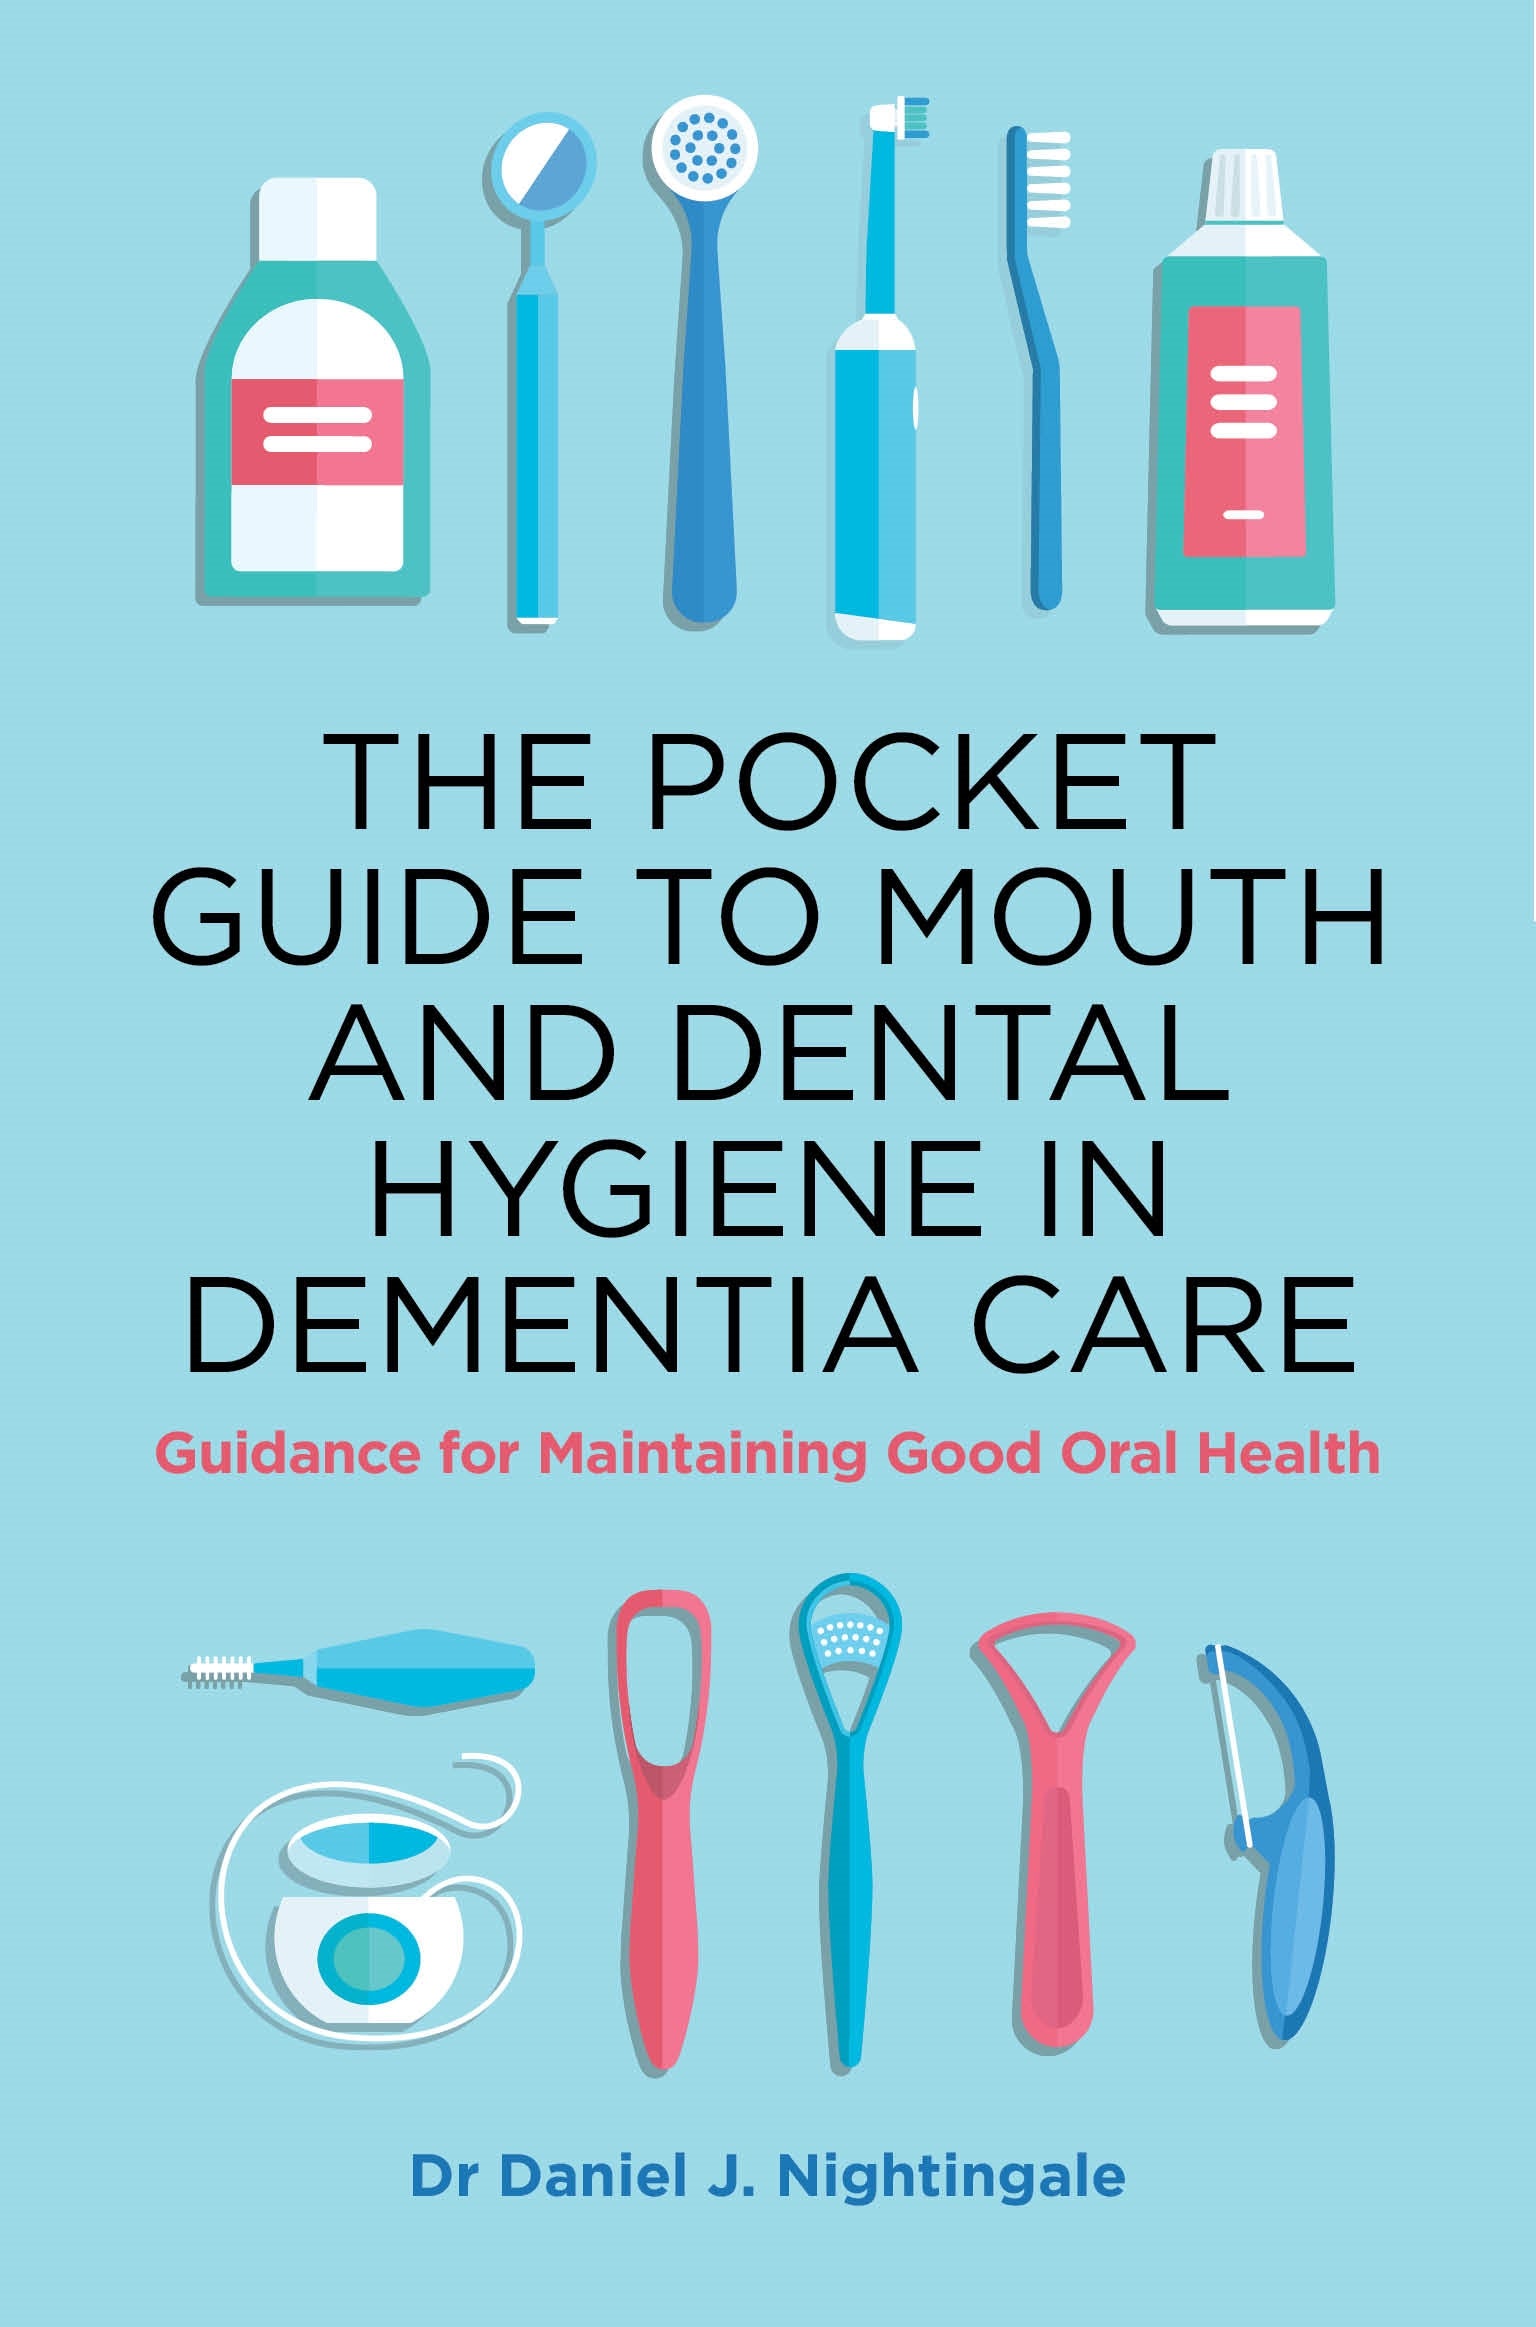 The Pocket Guide to Mouth and Dental Hygiene in Dementia Care by Daniel Nightingale